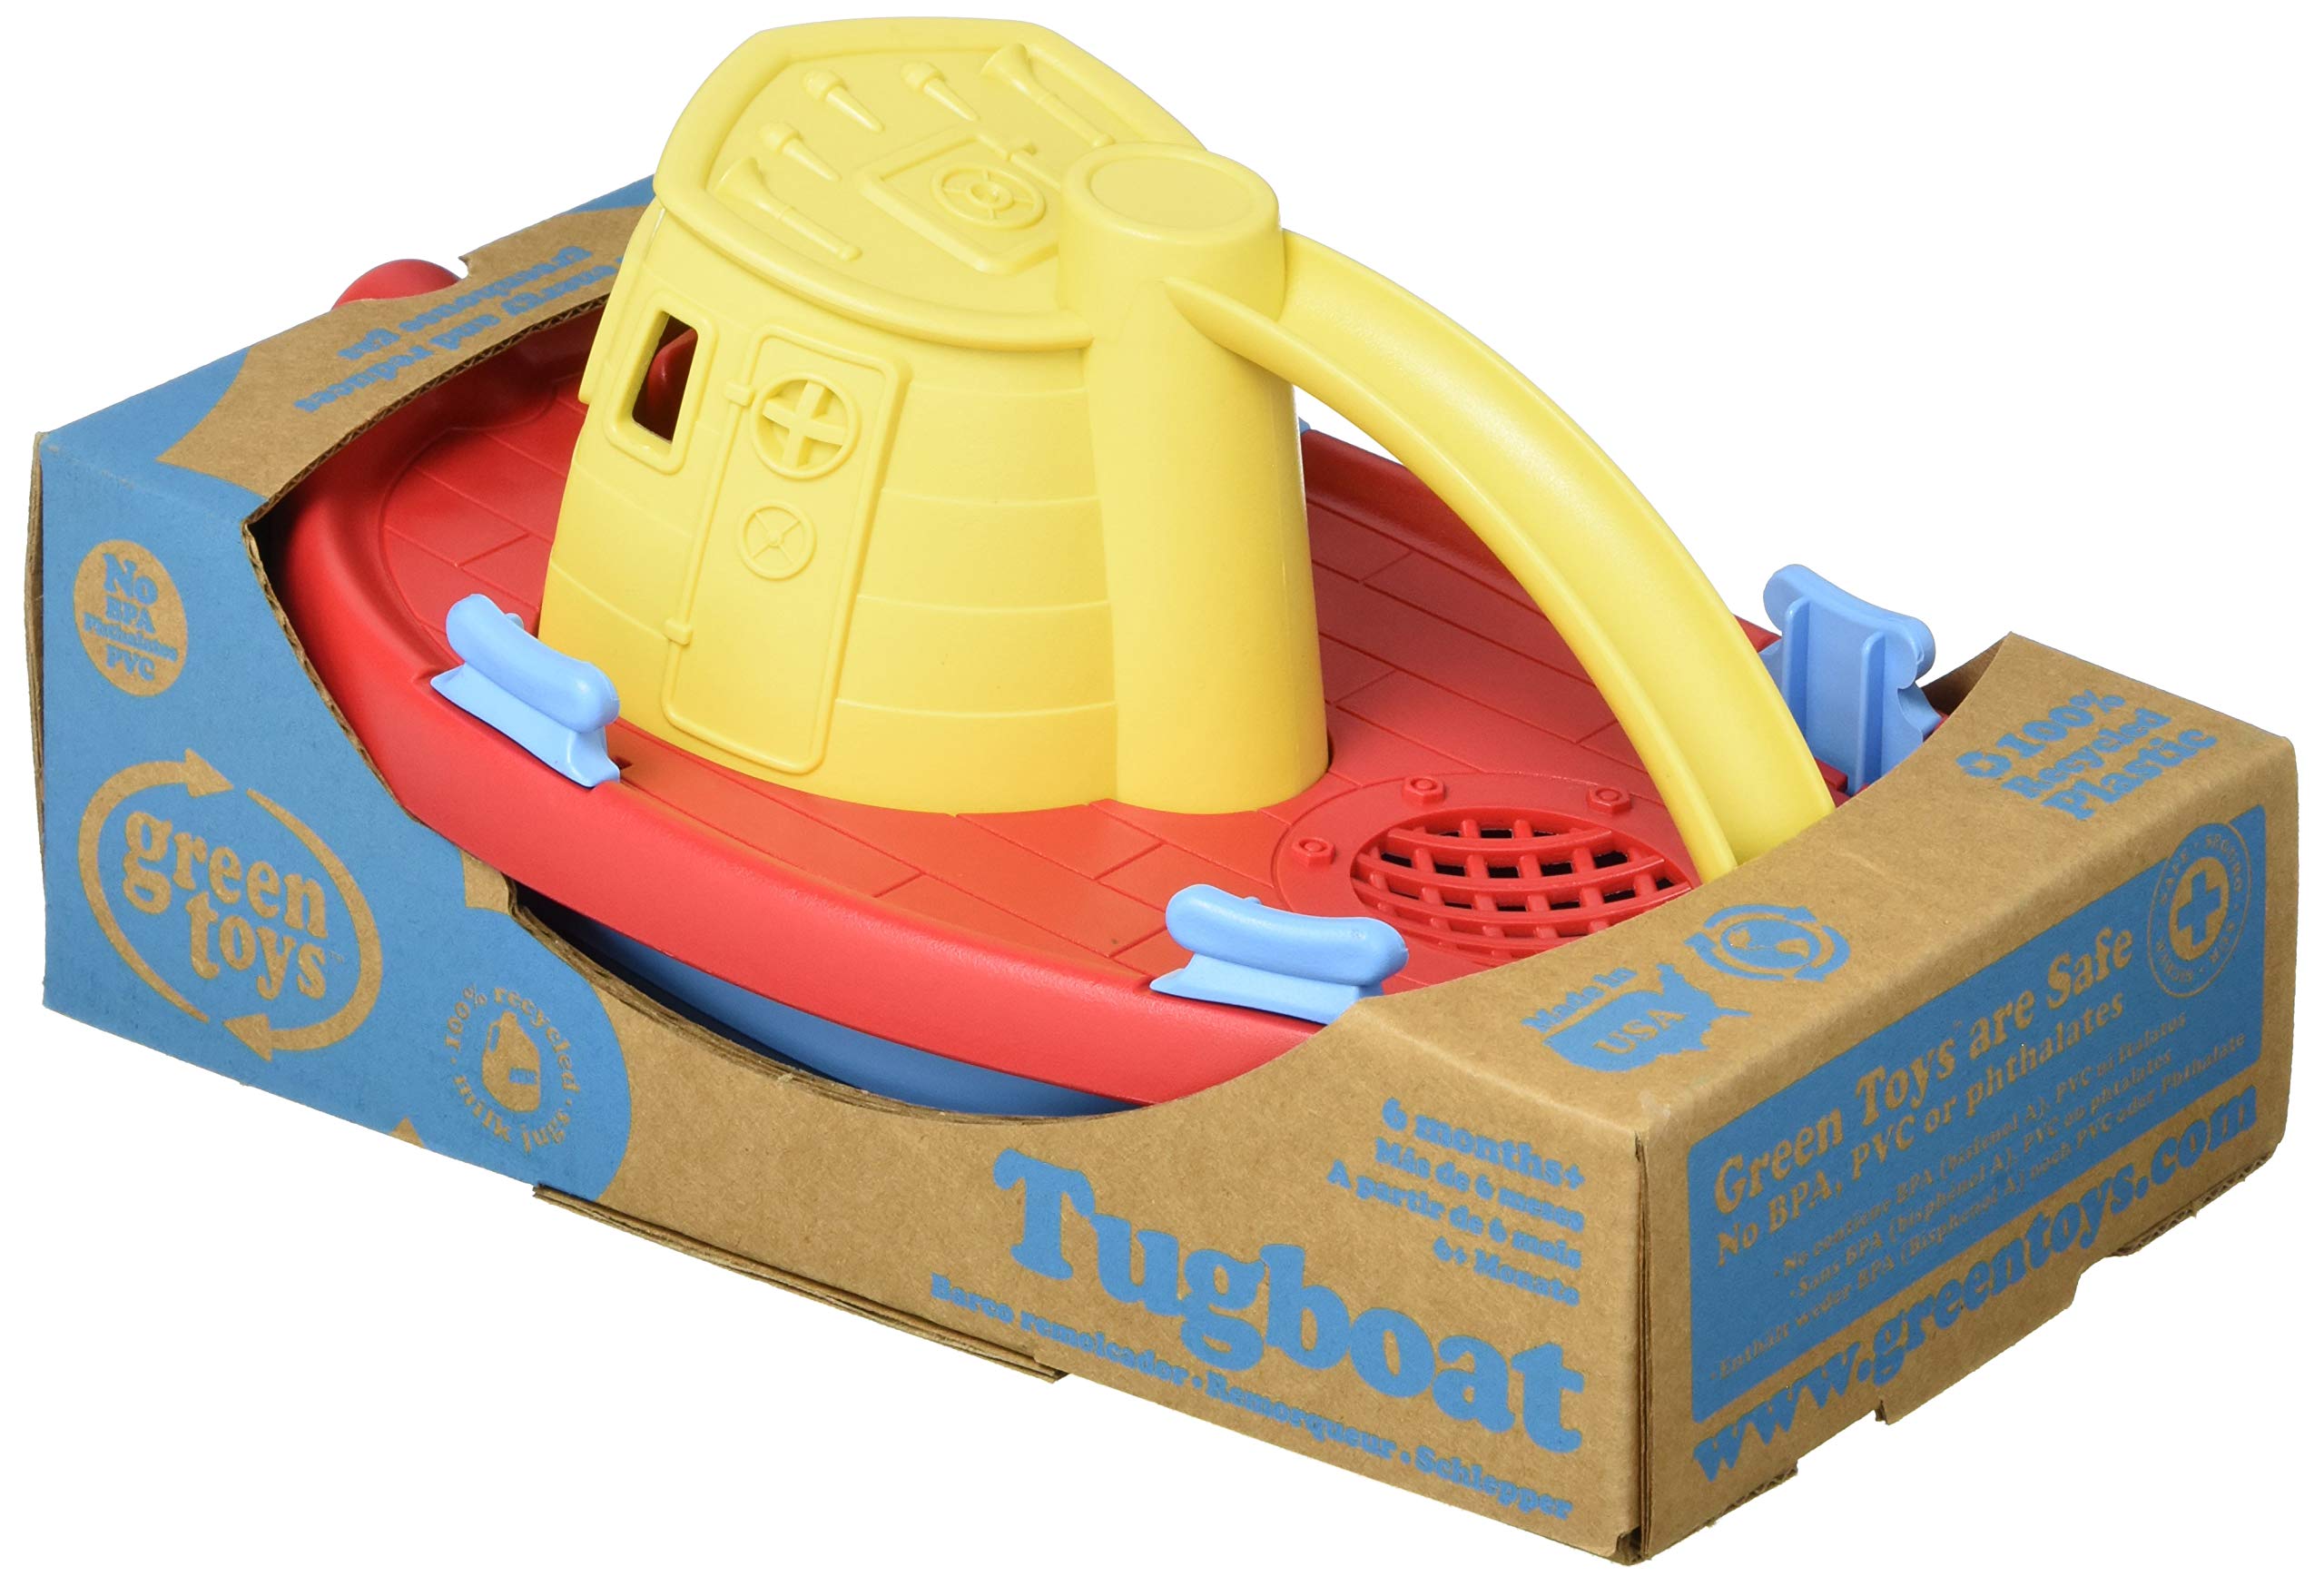 Green Toys Tugboat, Assorted CB - Pretend Play, Motor Skills, Kids Bath Toy Floating Pouring Vehicle. No BPA, phthalates, PVC. Dishwasher Safe, Recycled Plastic, Made in USA.